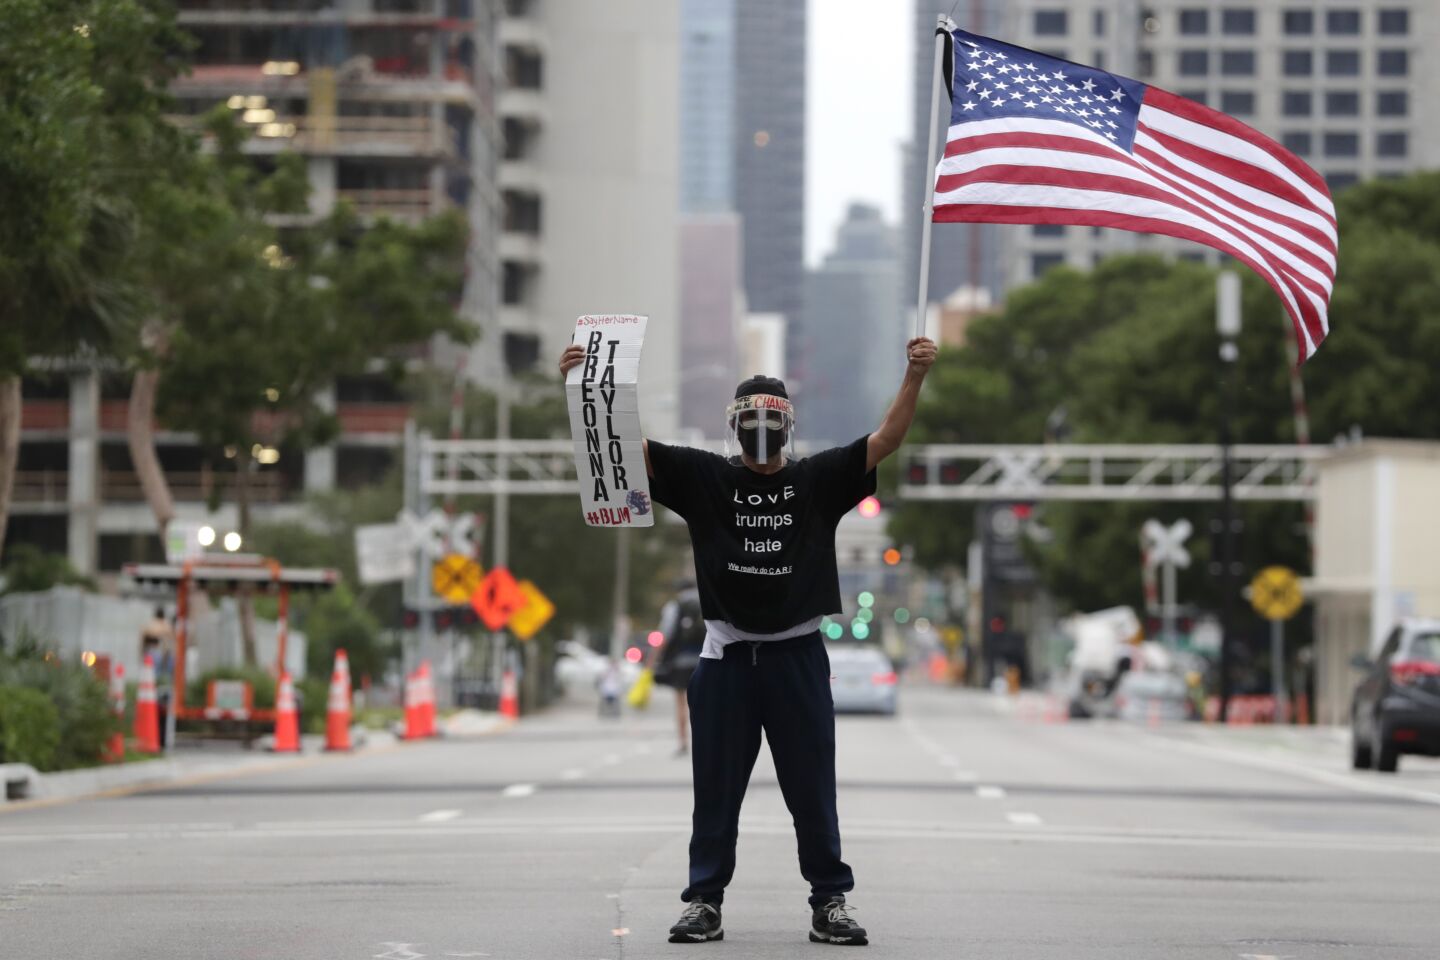 Freddie Peralta stands with the America flag as he holds a sign in memory of Breonna Taylor during a protest in Miami over the death of George Floyd and others, Saturday.